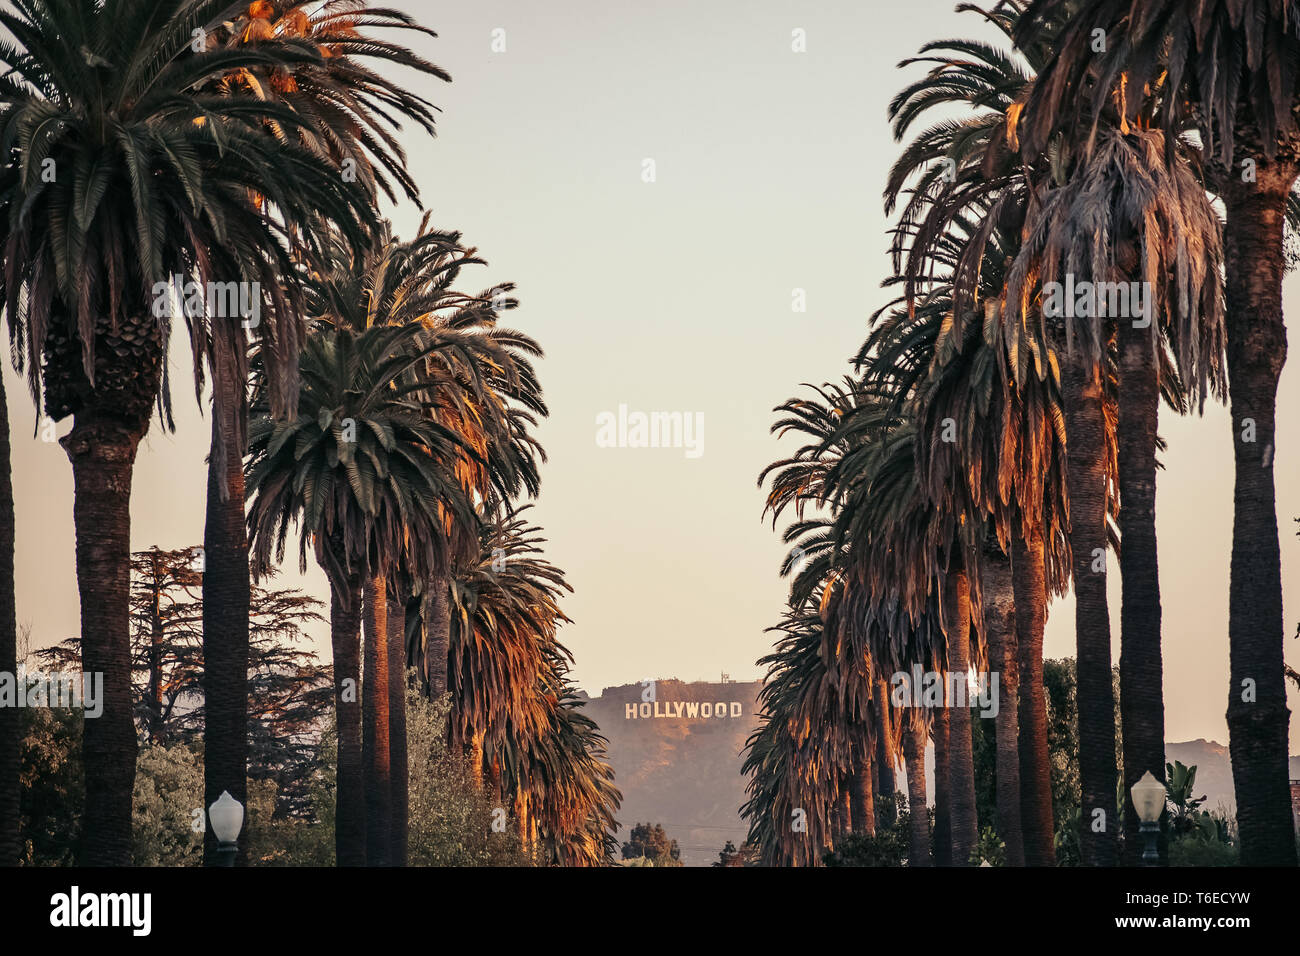 HOLLYWOOD sign surrounded by palm trees. World famous landmark. Los Angeles, California, USA Stock Photo